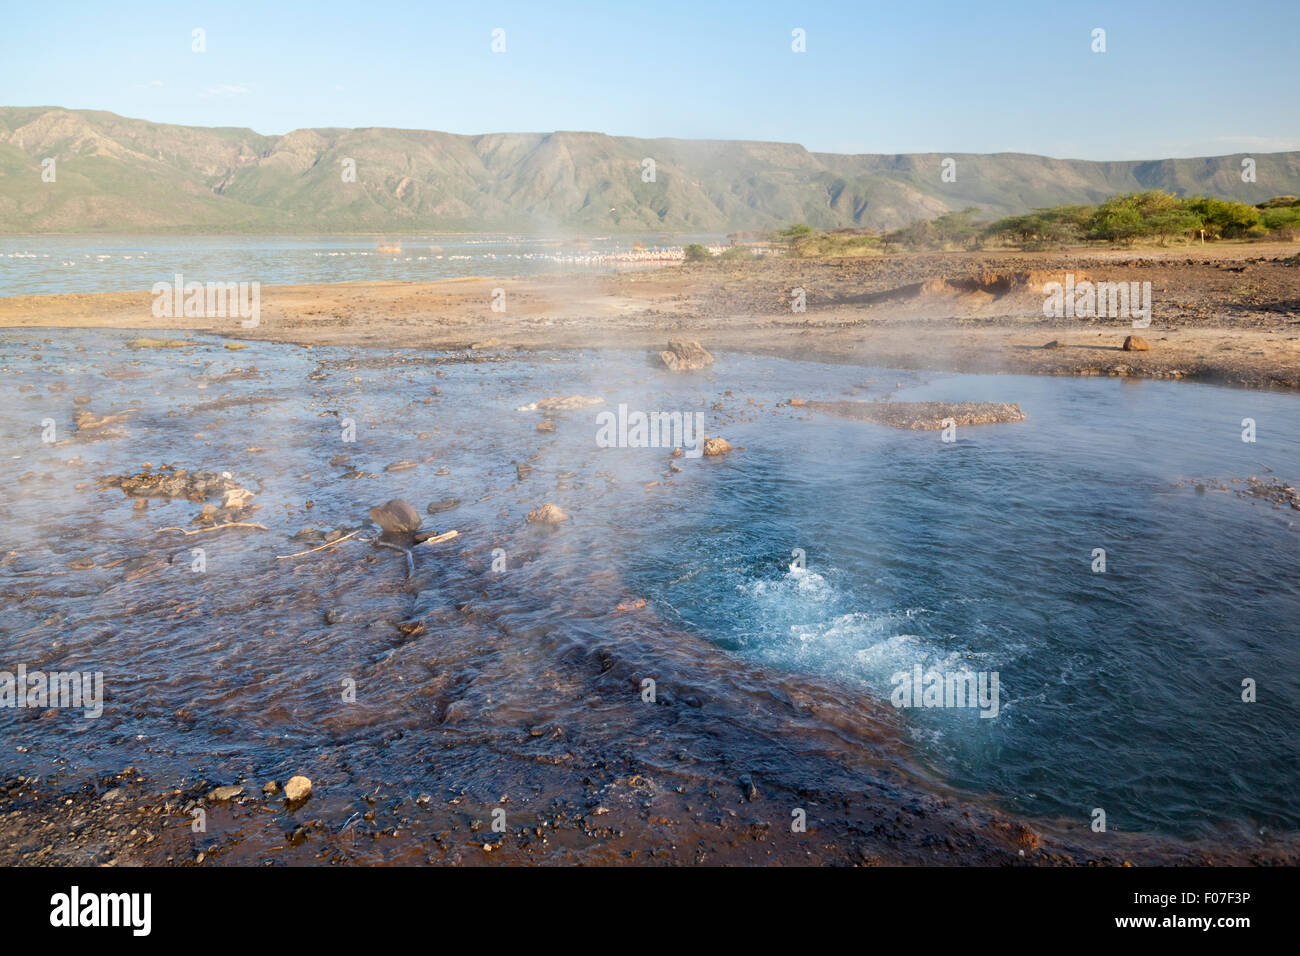 Hot springs at Lake Bogoria in Kenya with flamingos in the background. Stock Photo